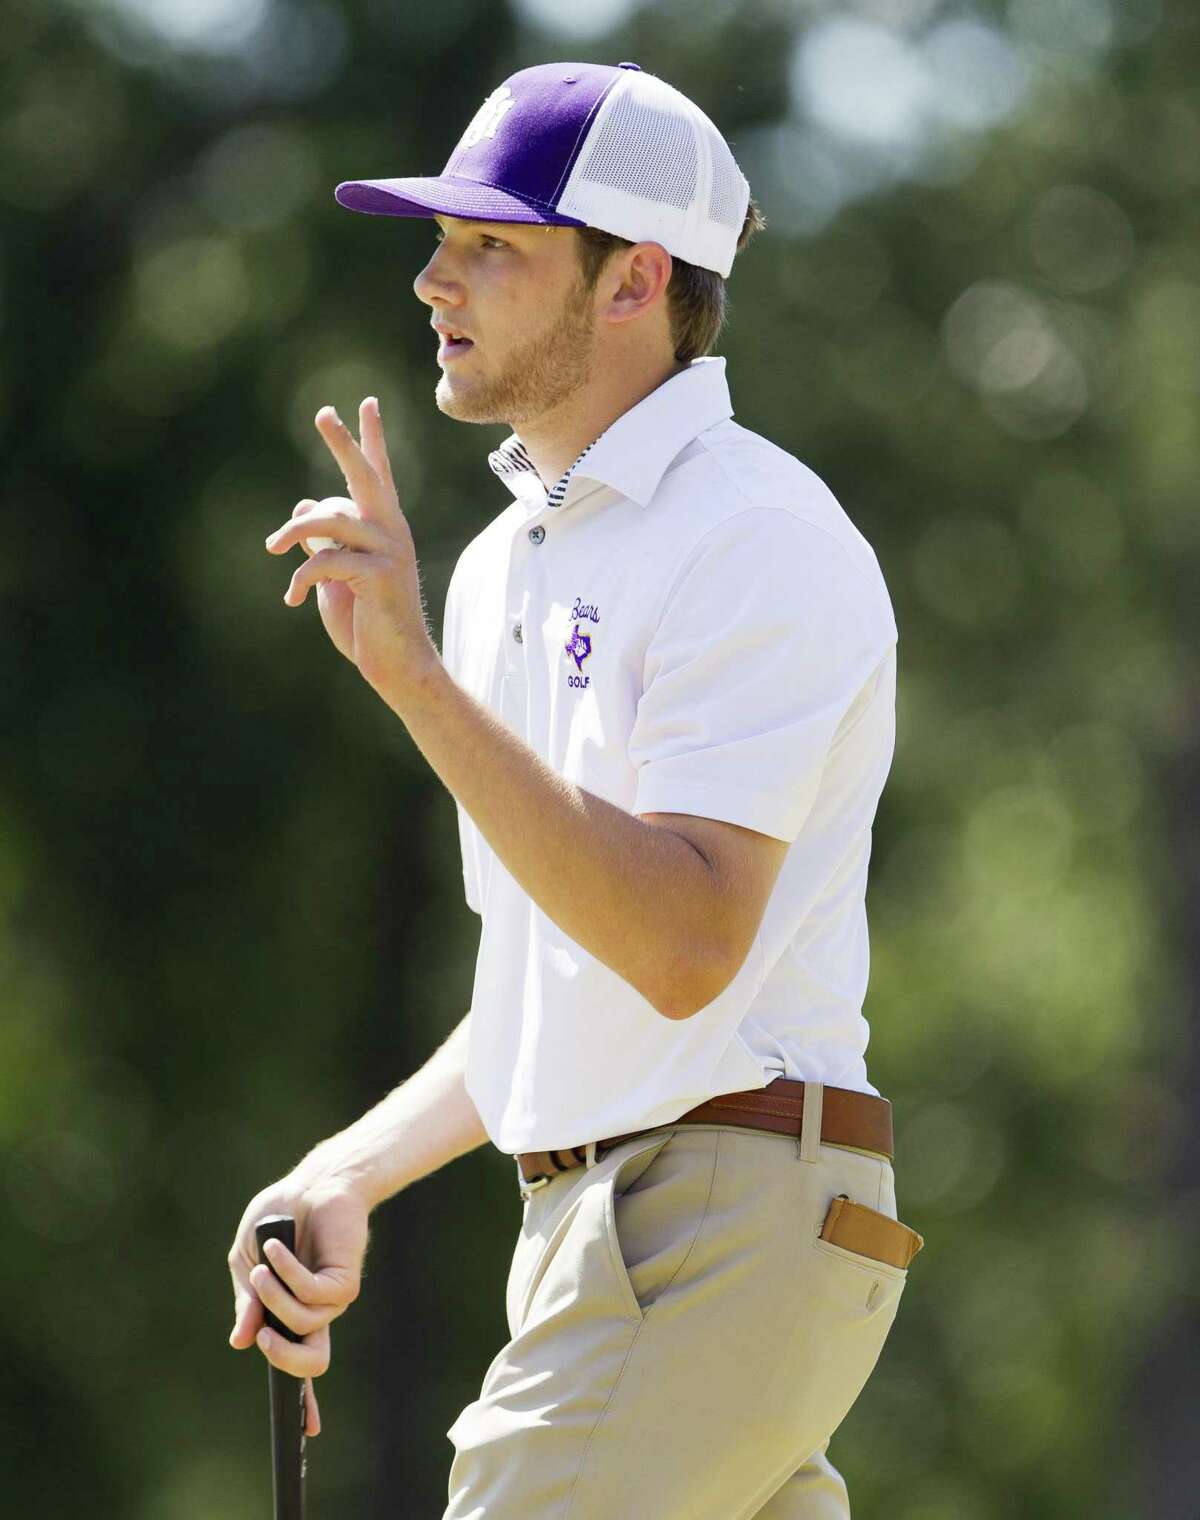 Terrin Anderson of Montgomery acknowledges the crowd after making a par putt 18th green to finish the tournament first overall during the final round of the Region III-5A Boys Golf Championship at the Golf Club at La Torretta, Thursday, April 25, 2019, in Montgomery.